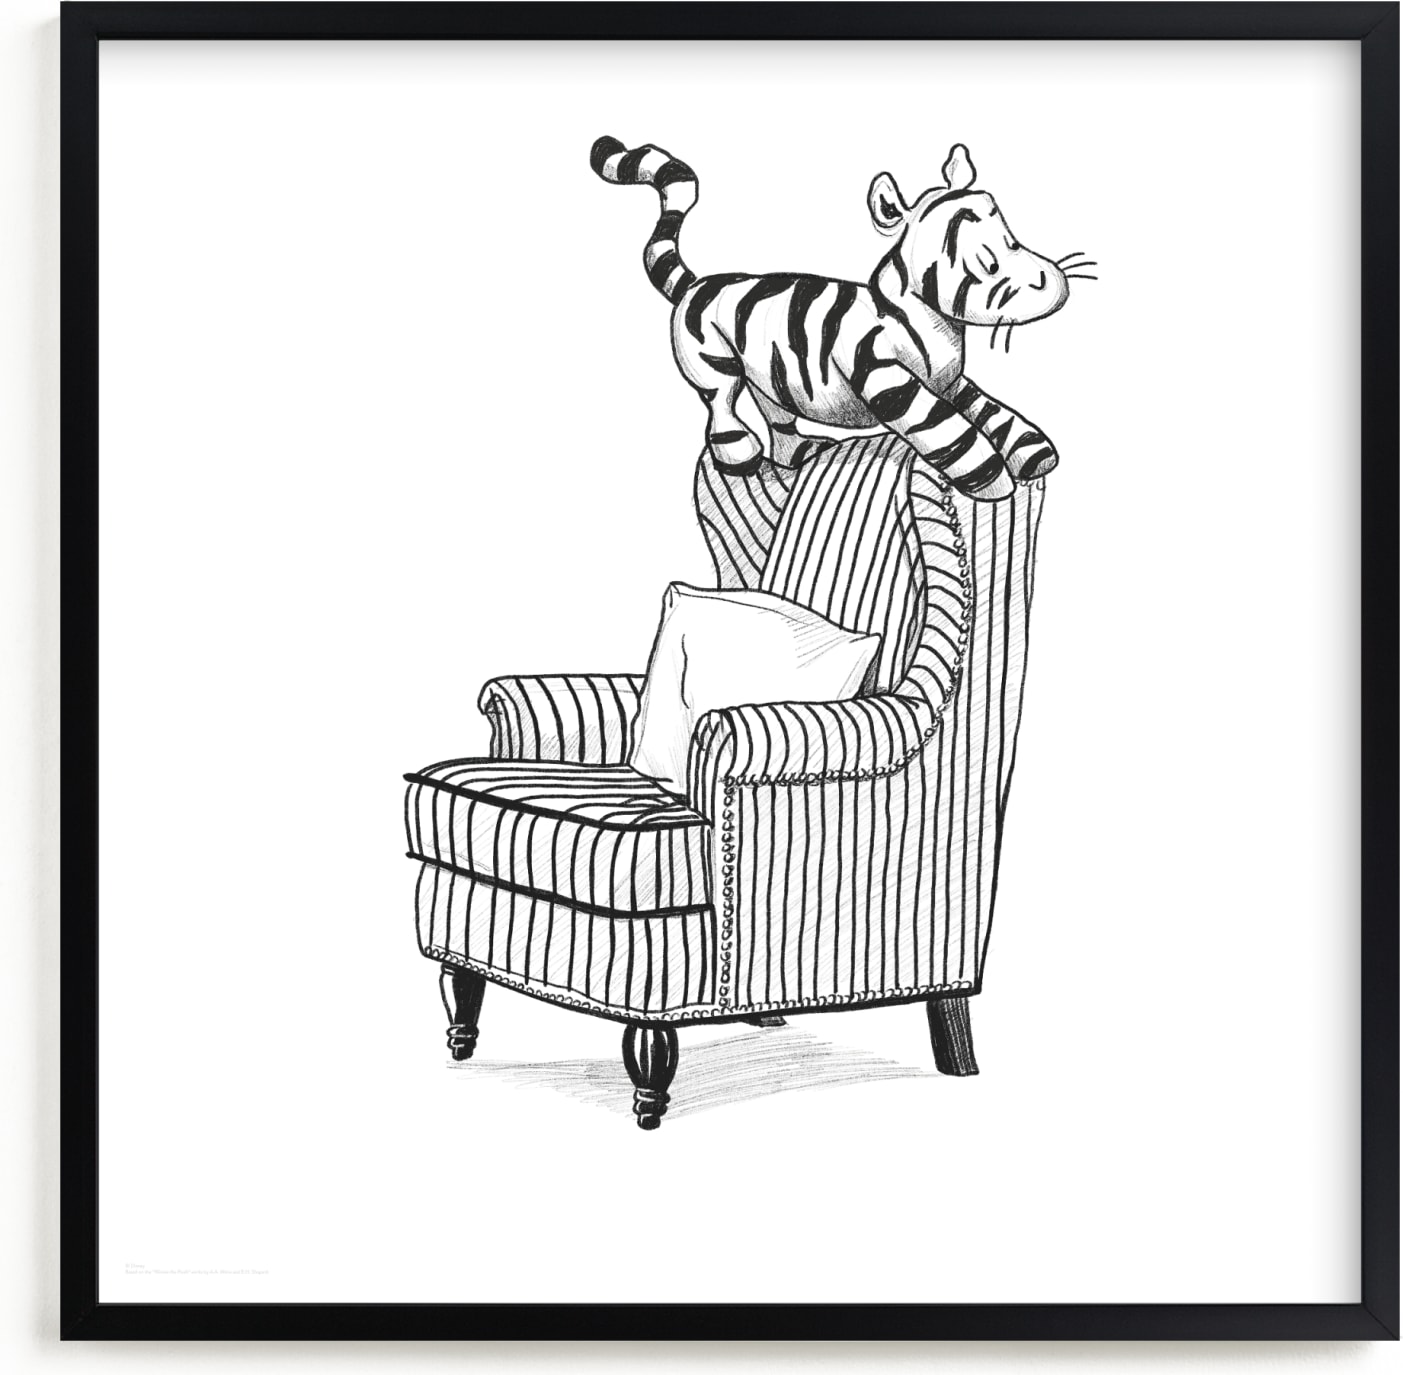 This is a black and white disney art by Stefanie Lane called Tigger Lounging | Winnie The Pooh.